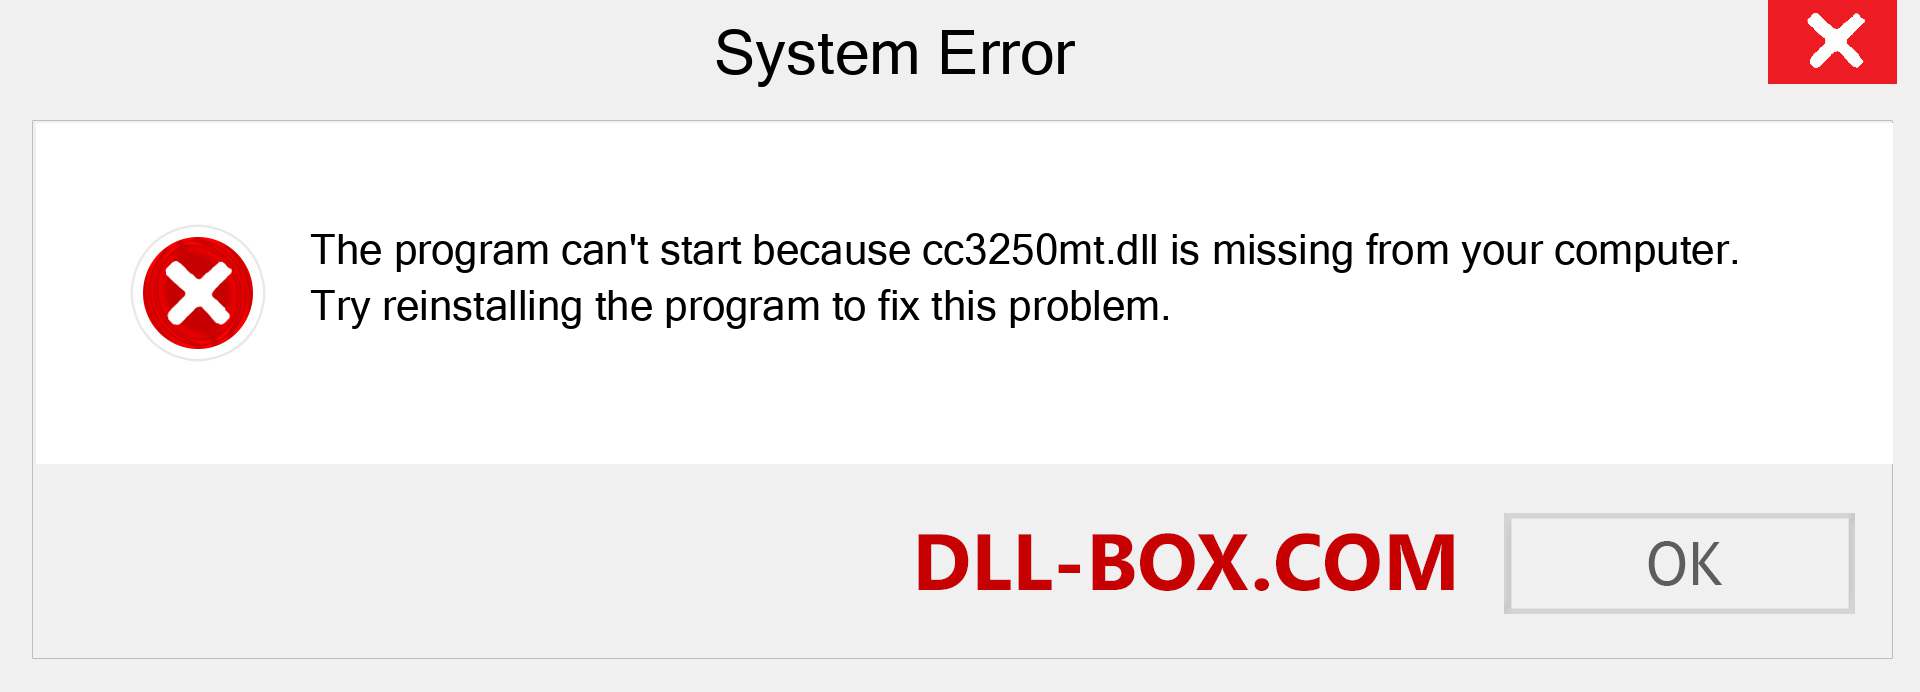  cc3250mt.dll file is missing?. Download for Windows 7, 8, 10 - Fix  cc3250mt dll Missing Error on Windows, photos, images